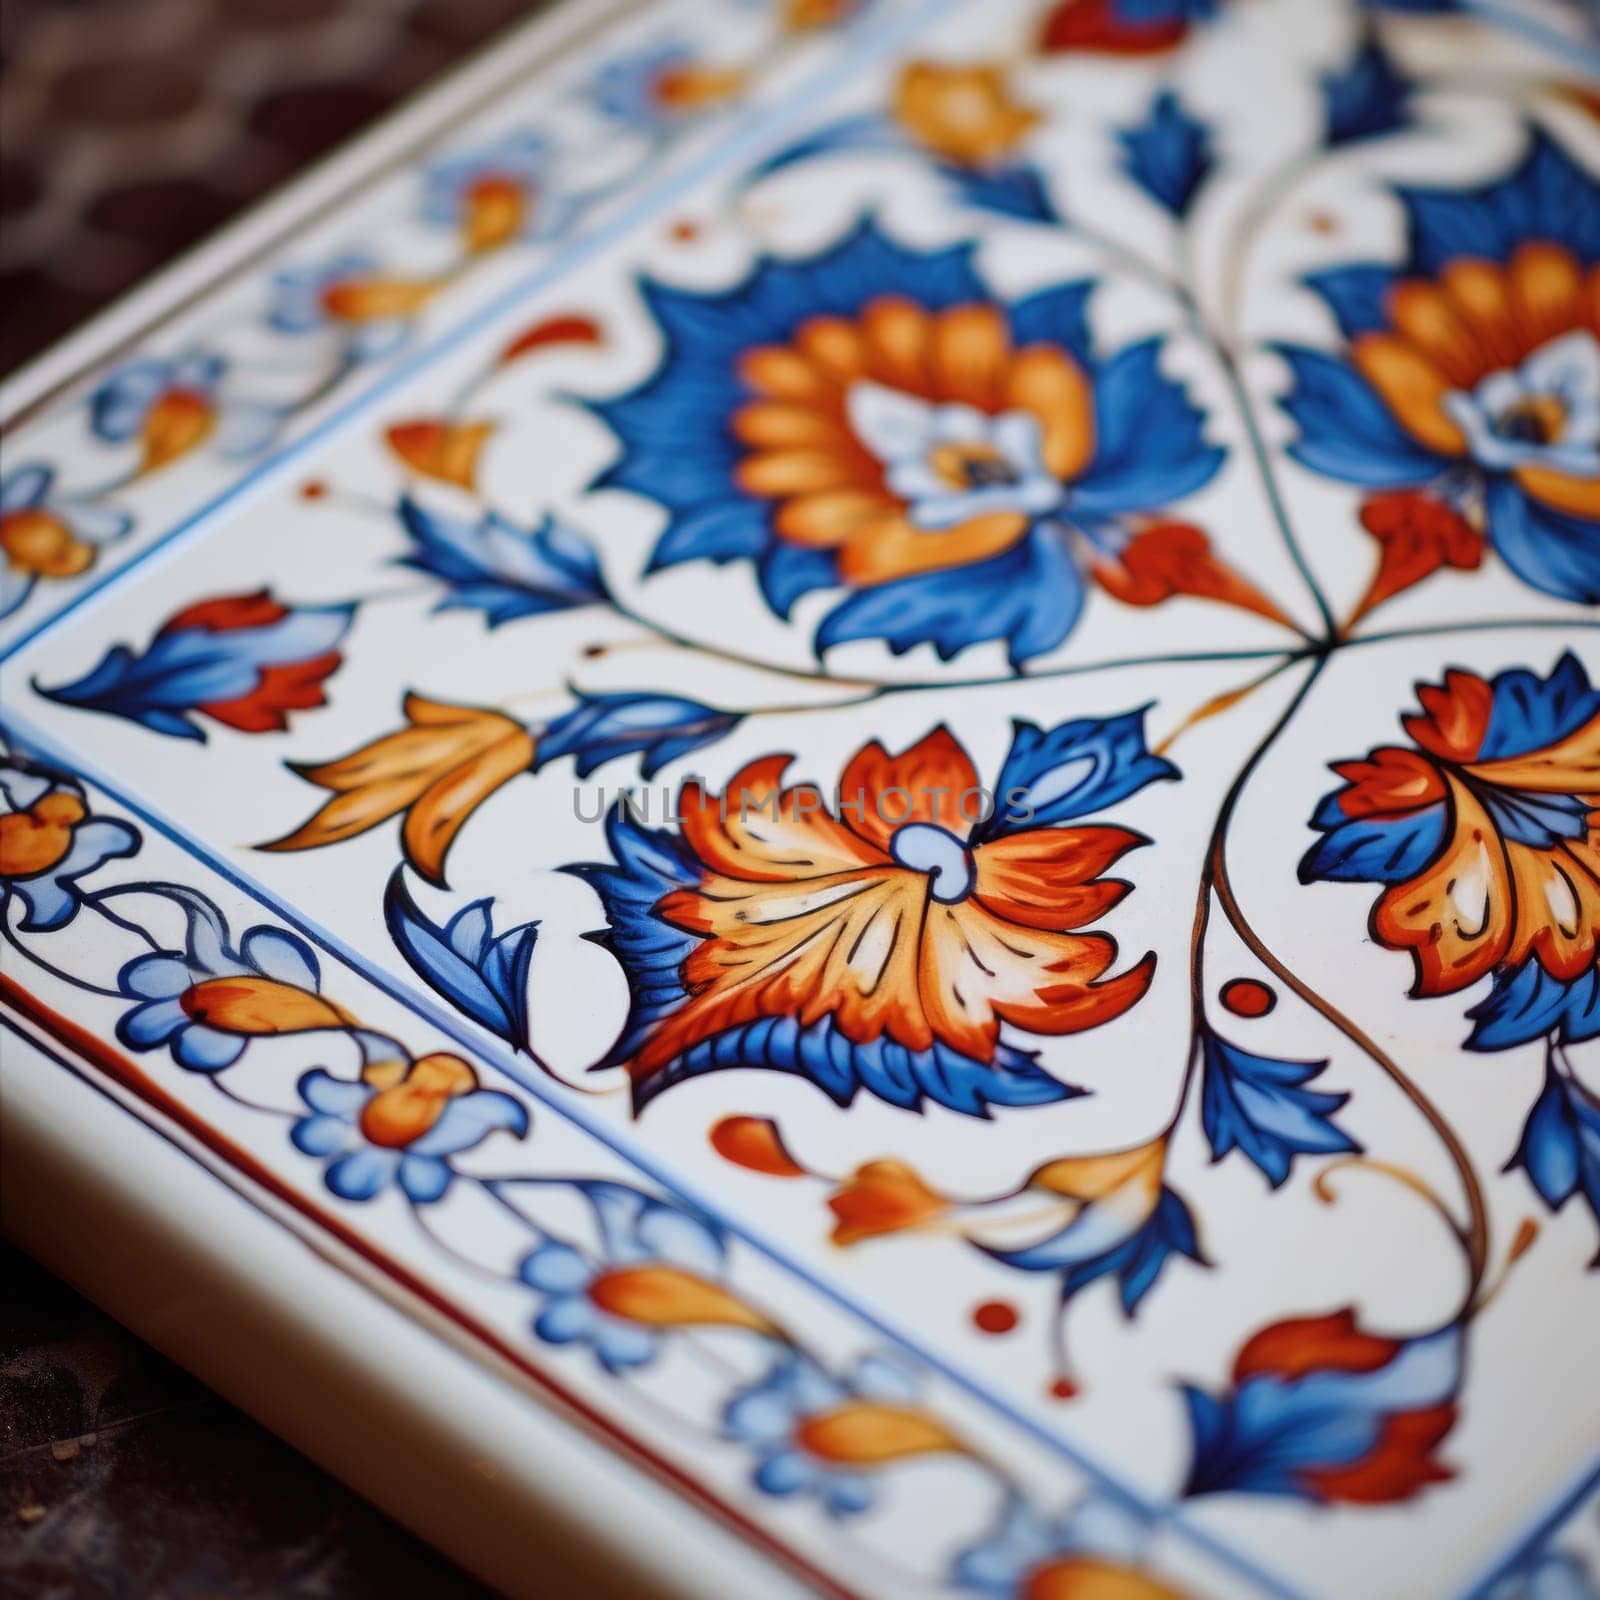 A close up of a colorful tile with blue, orange and red flowers, AI by starush